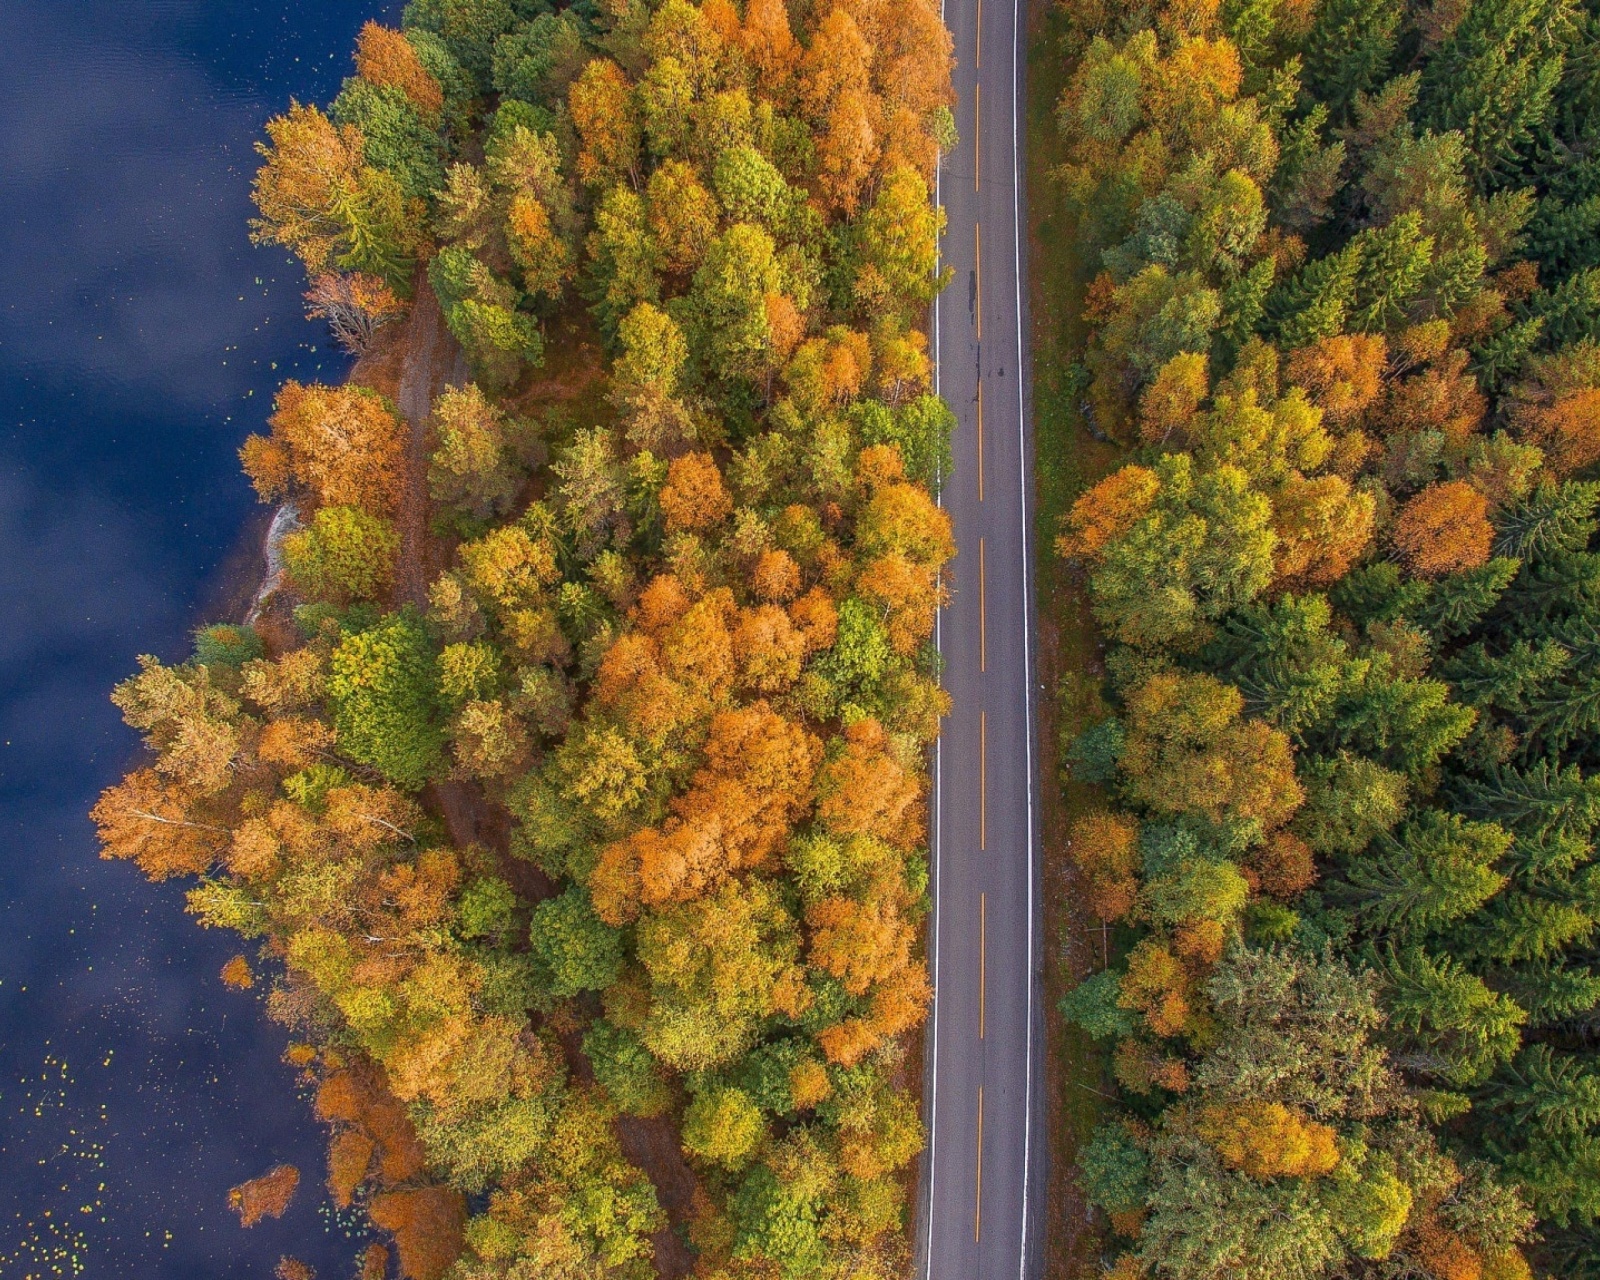 Drone photo of autumn forest screenshot #1 1600x1280